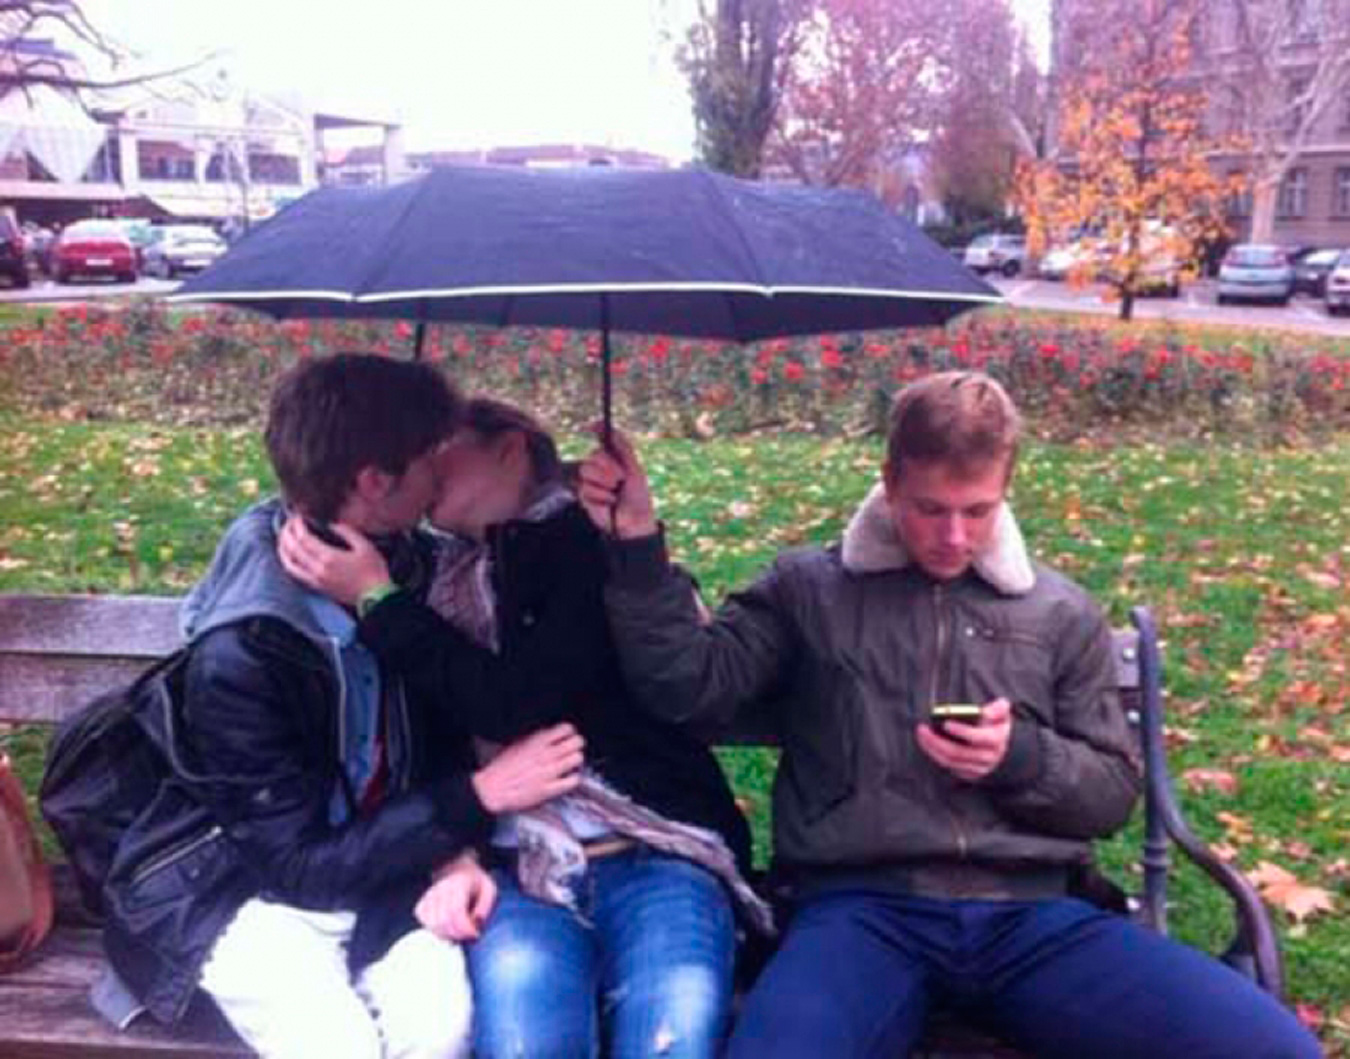 High Quality Guy holding umbrella next to couple making out Blank Meme Template